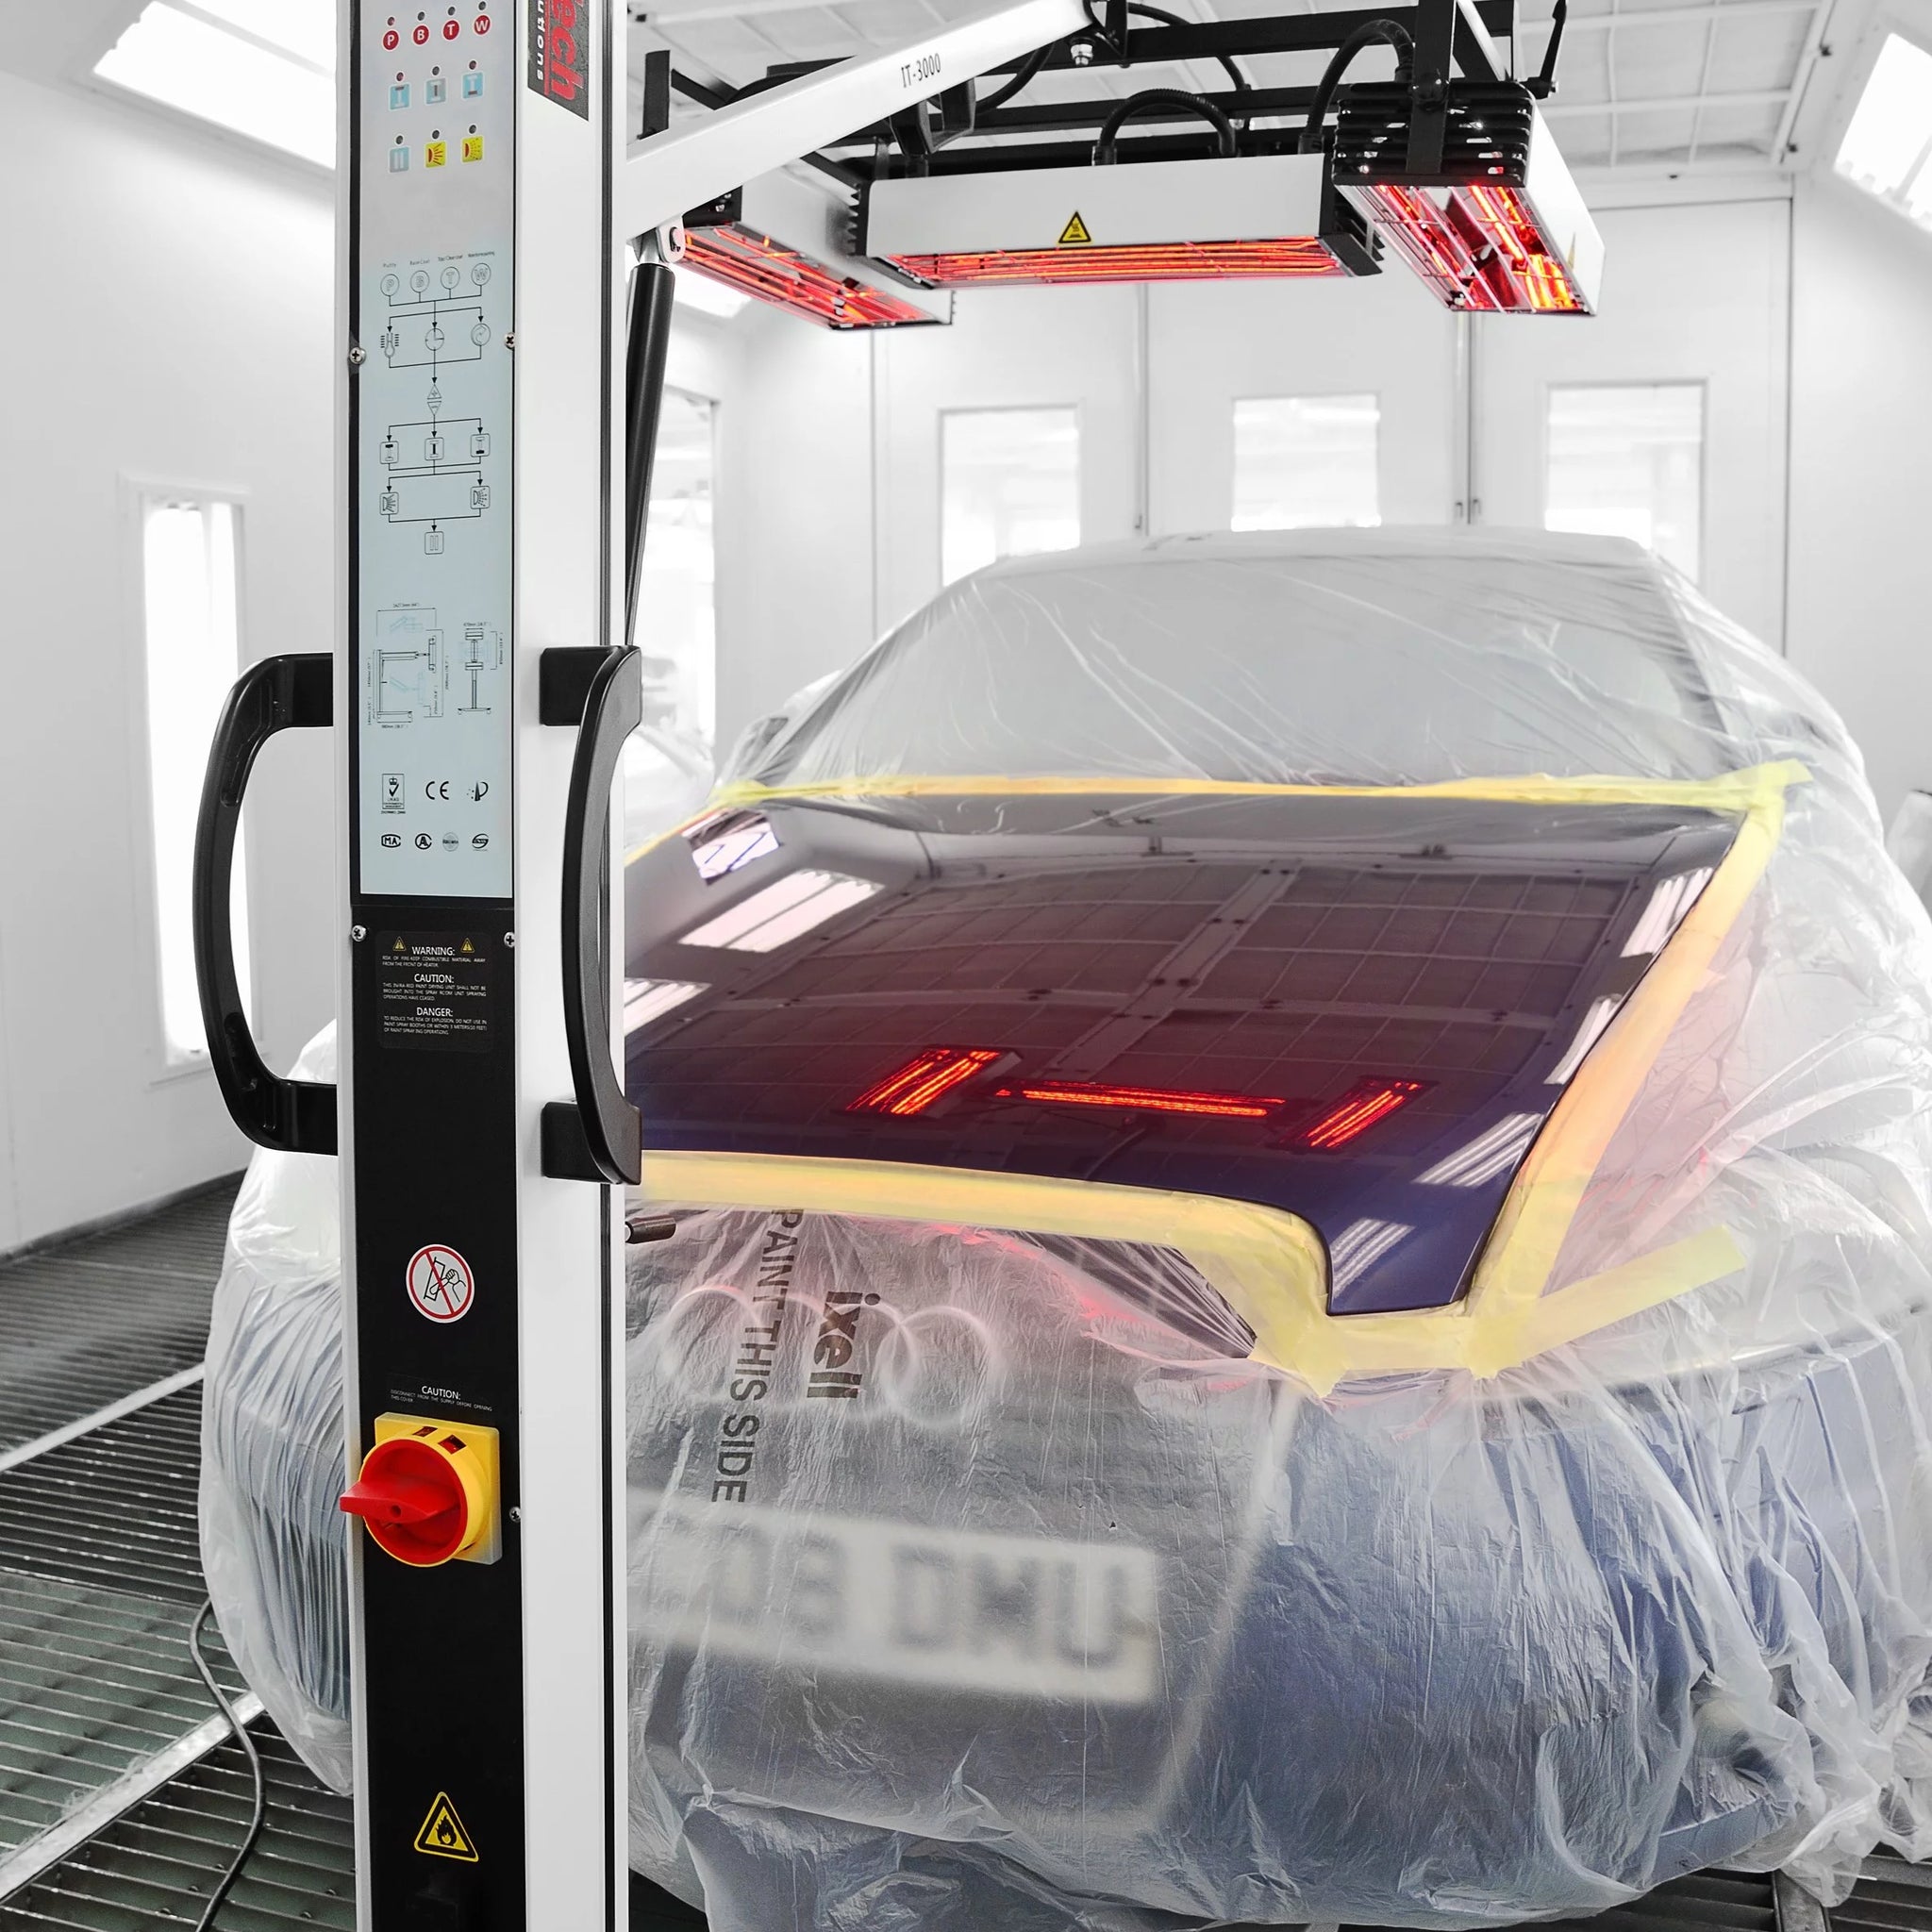 Other Uses For Infratech’s Infrared Curing Lamps